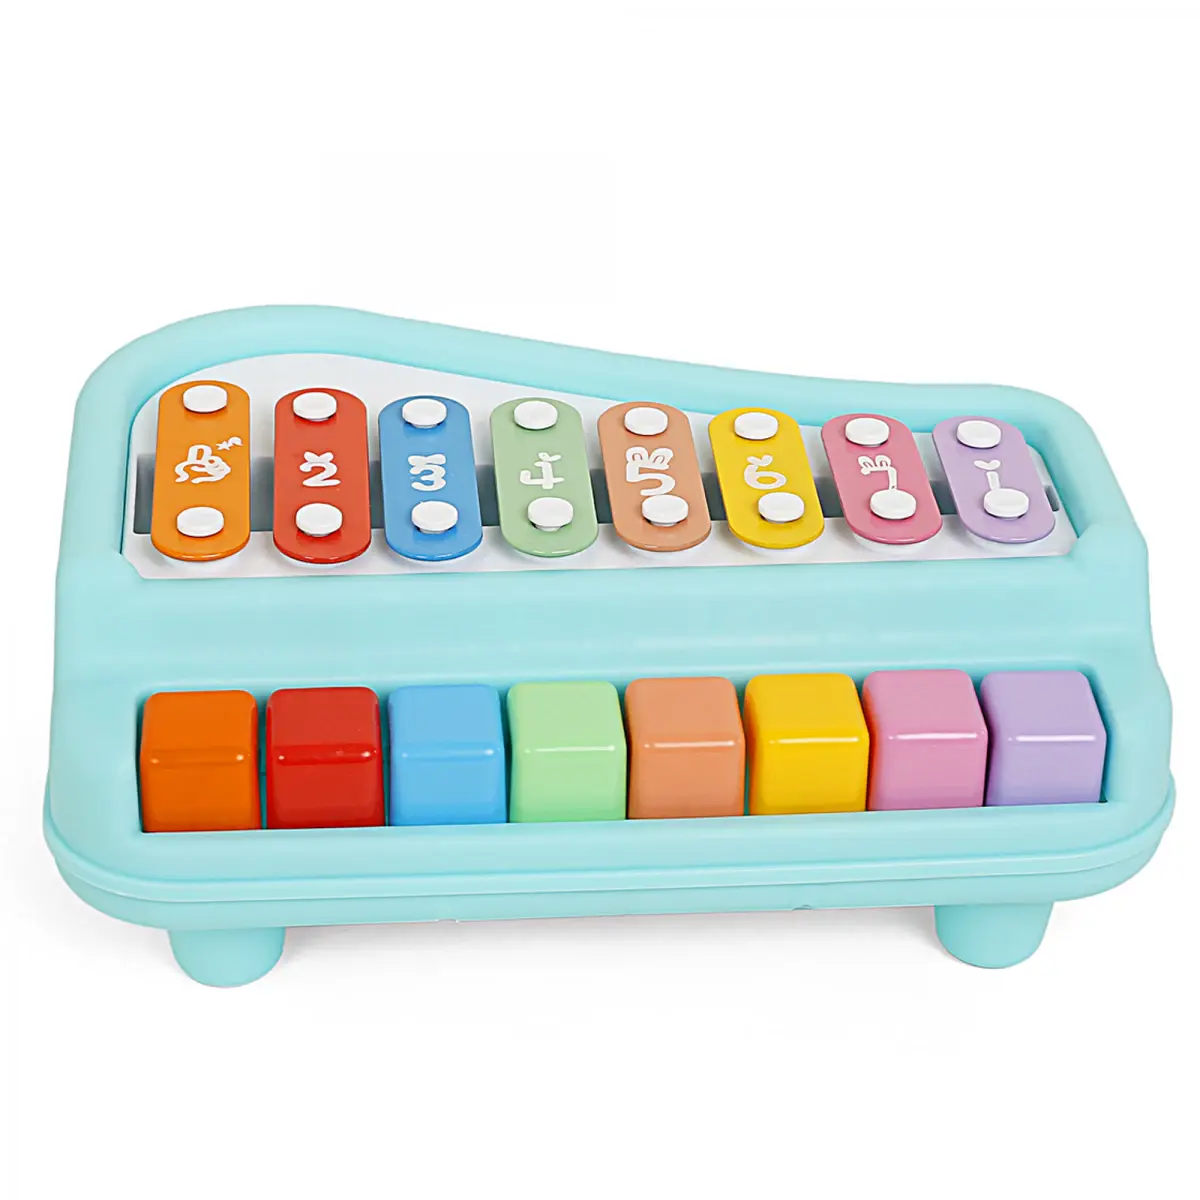 Shooting Star 2 in 1 Melodious Xylophone Piano, 18M+, Multicolour